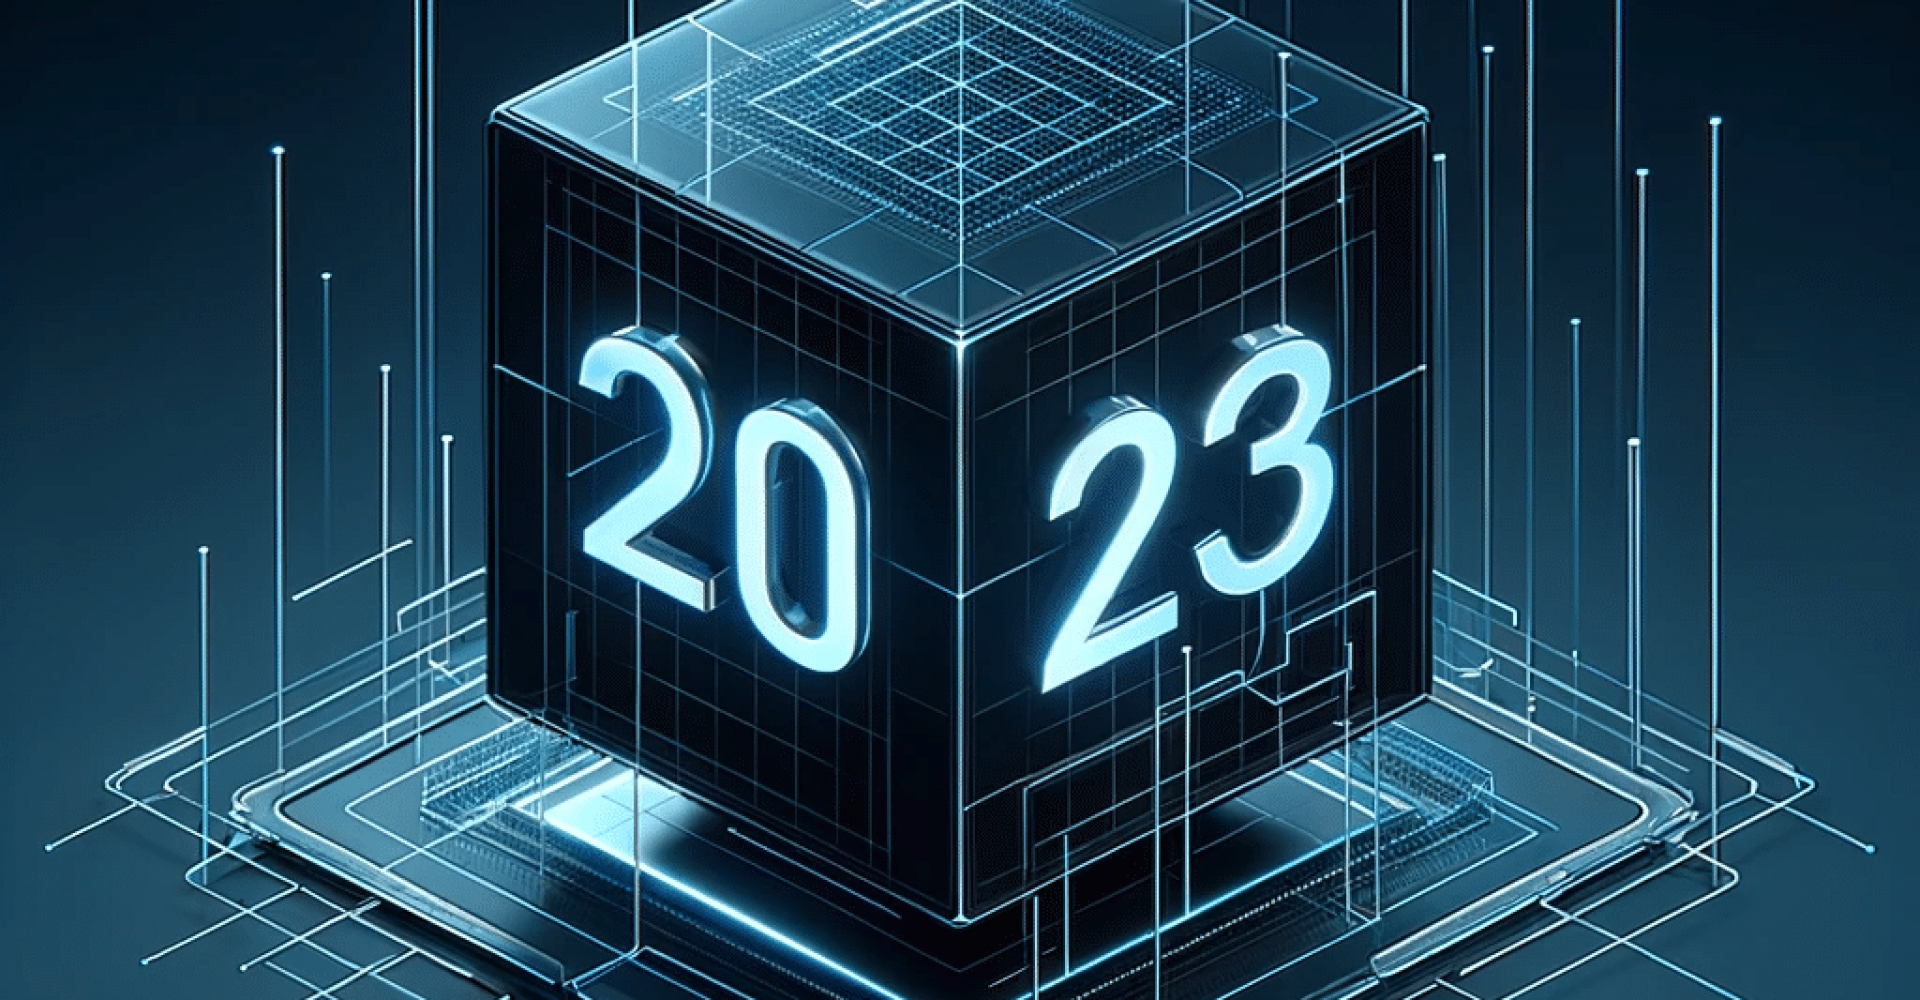 DALL·E 2023-12-20 16.55.59 - Adjust the current image by placing the numbers '20 23' on the facing side of the central cube, instead of the top. The cube is part of a holographic